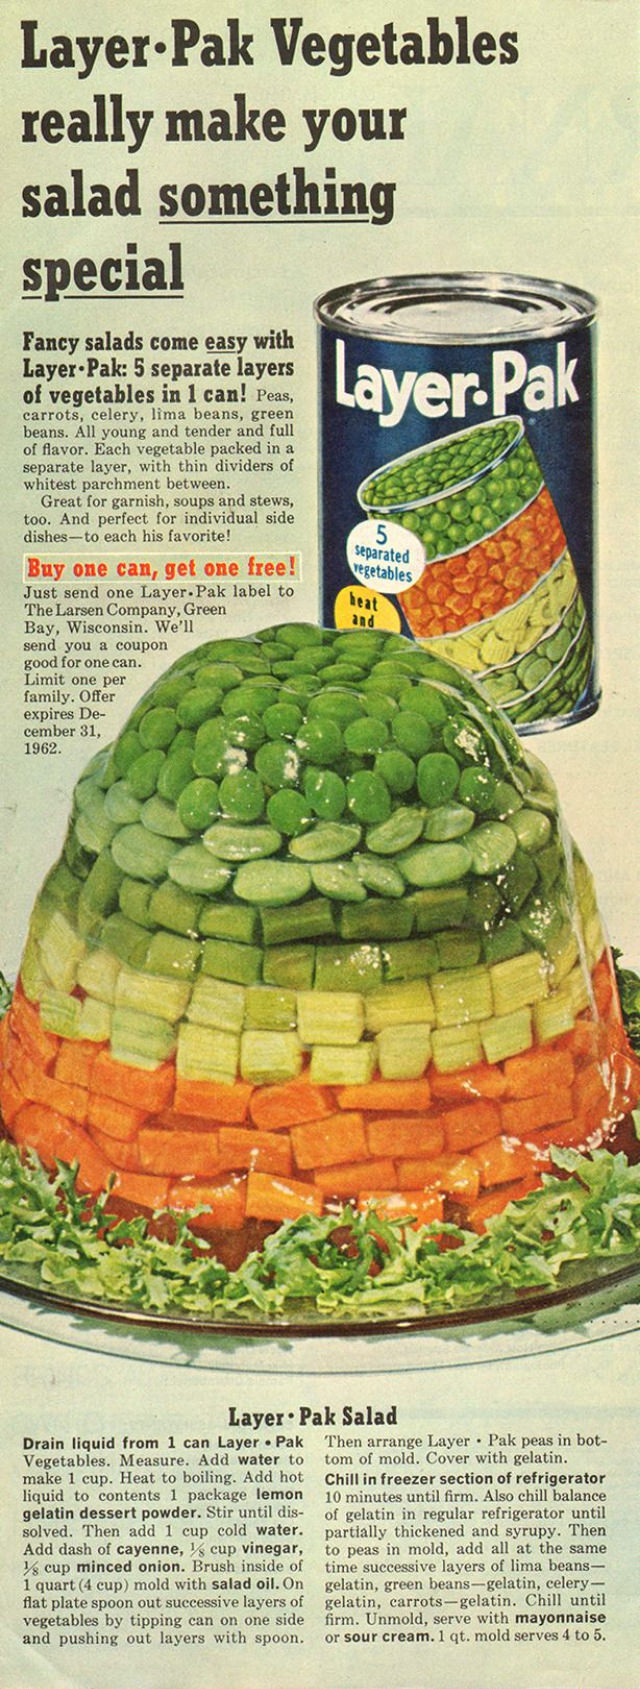 The Layer-Pak Revolution: A Fresh Take on Canned Vegetables in 1948